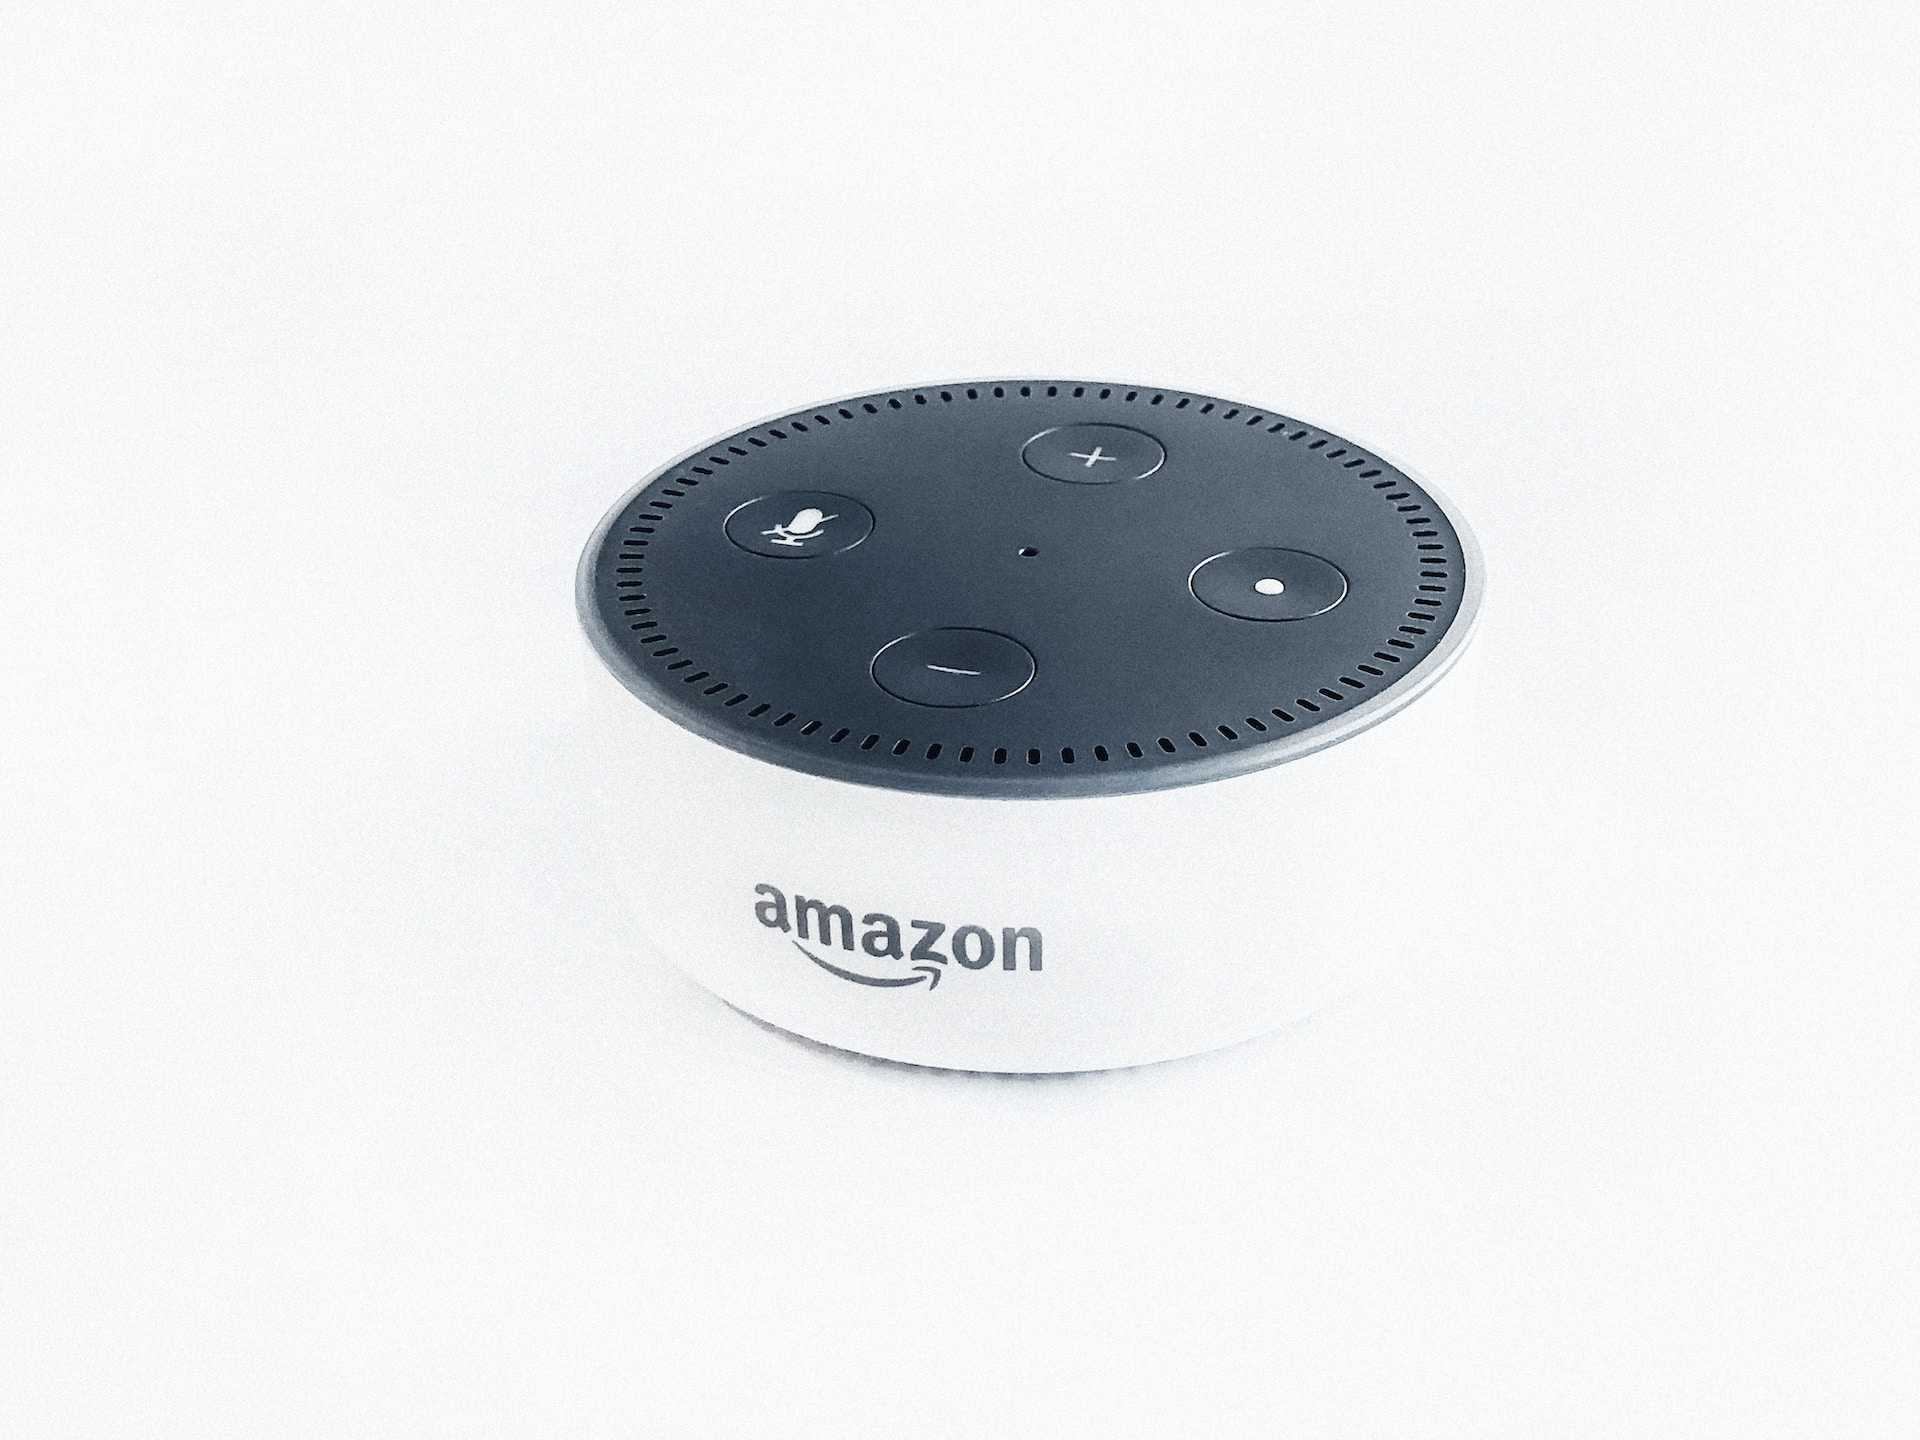 Alexa and Ring Privacy Lawsuits: Amazon to Pay Over $30M in Settlement